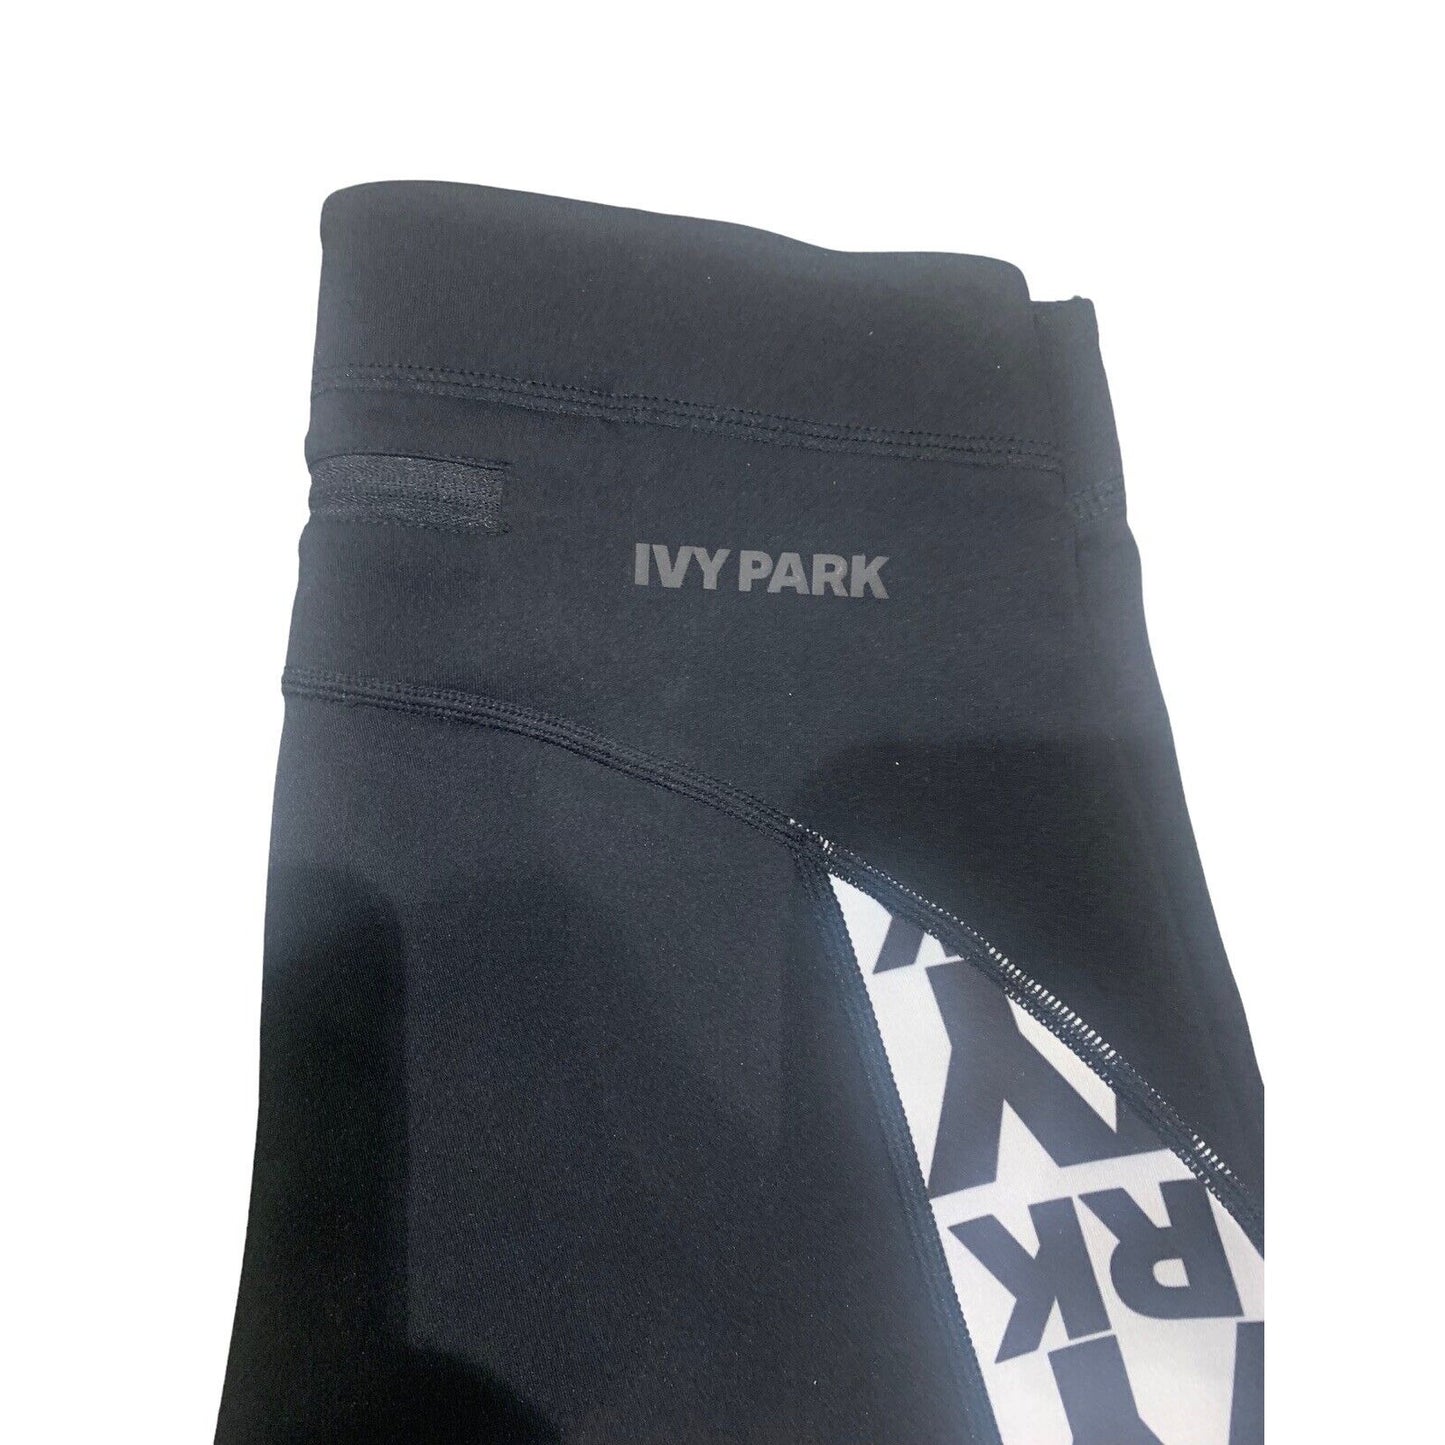 Ivy Park Active Legging With Black And White Optic Graphic Inset